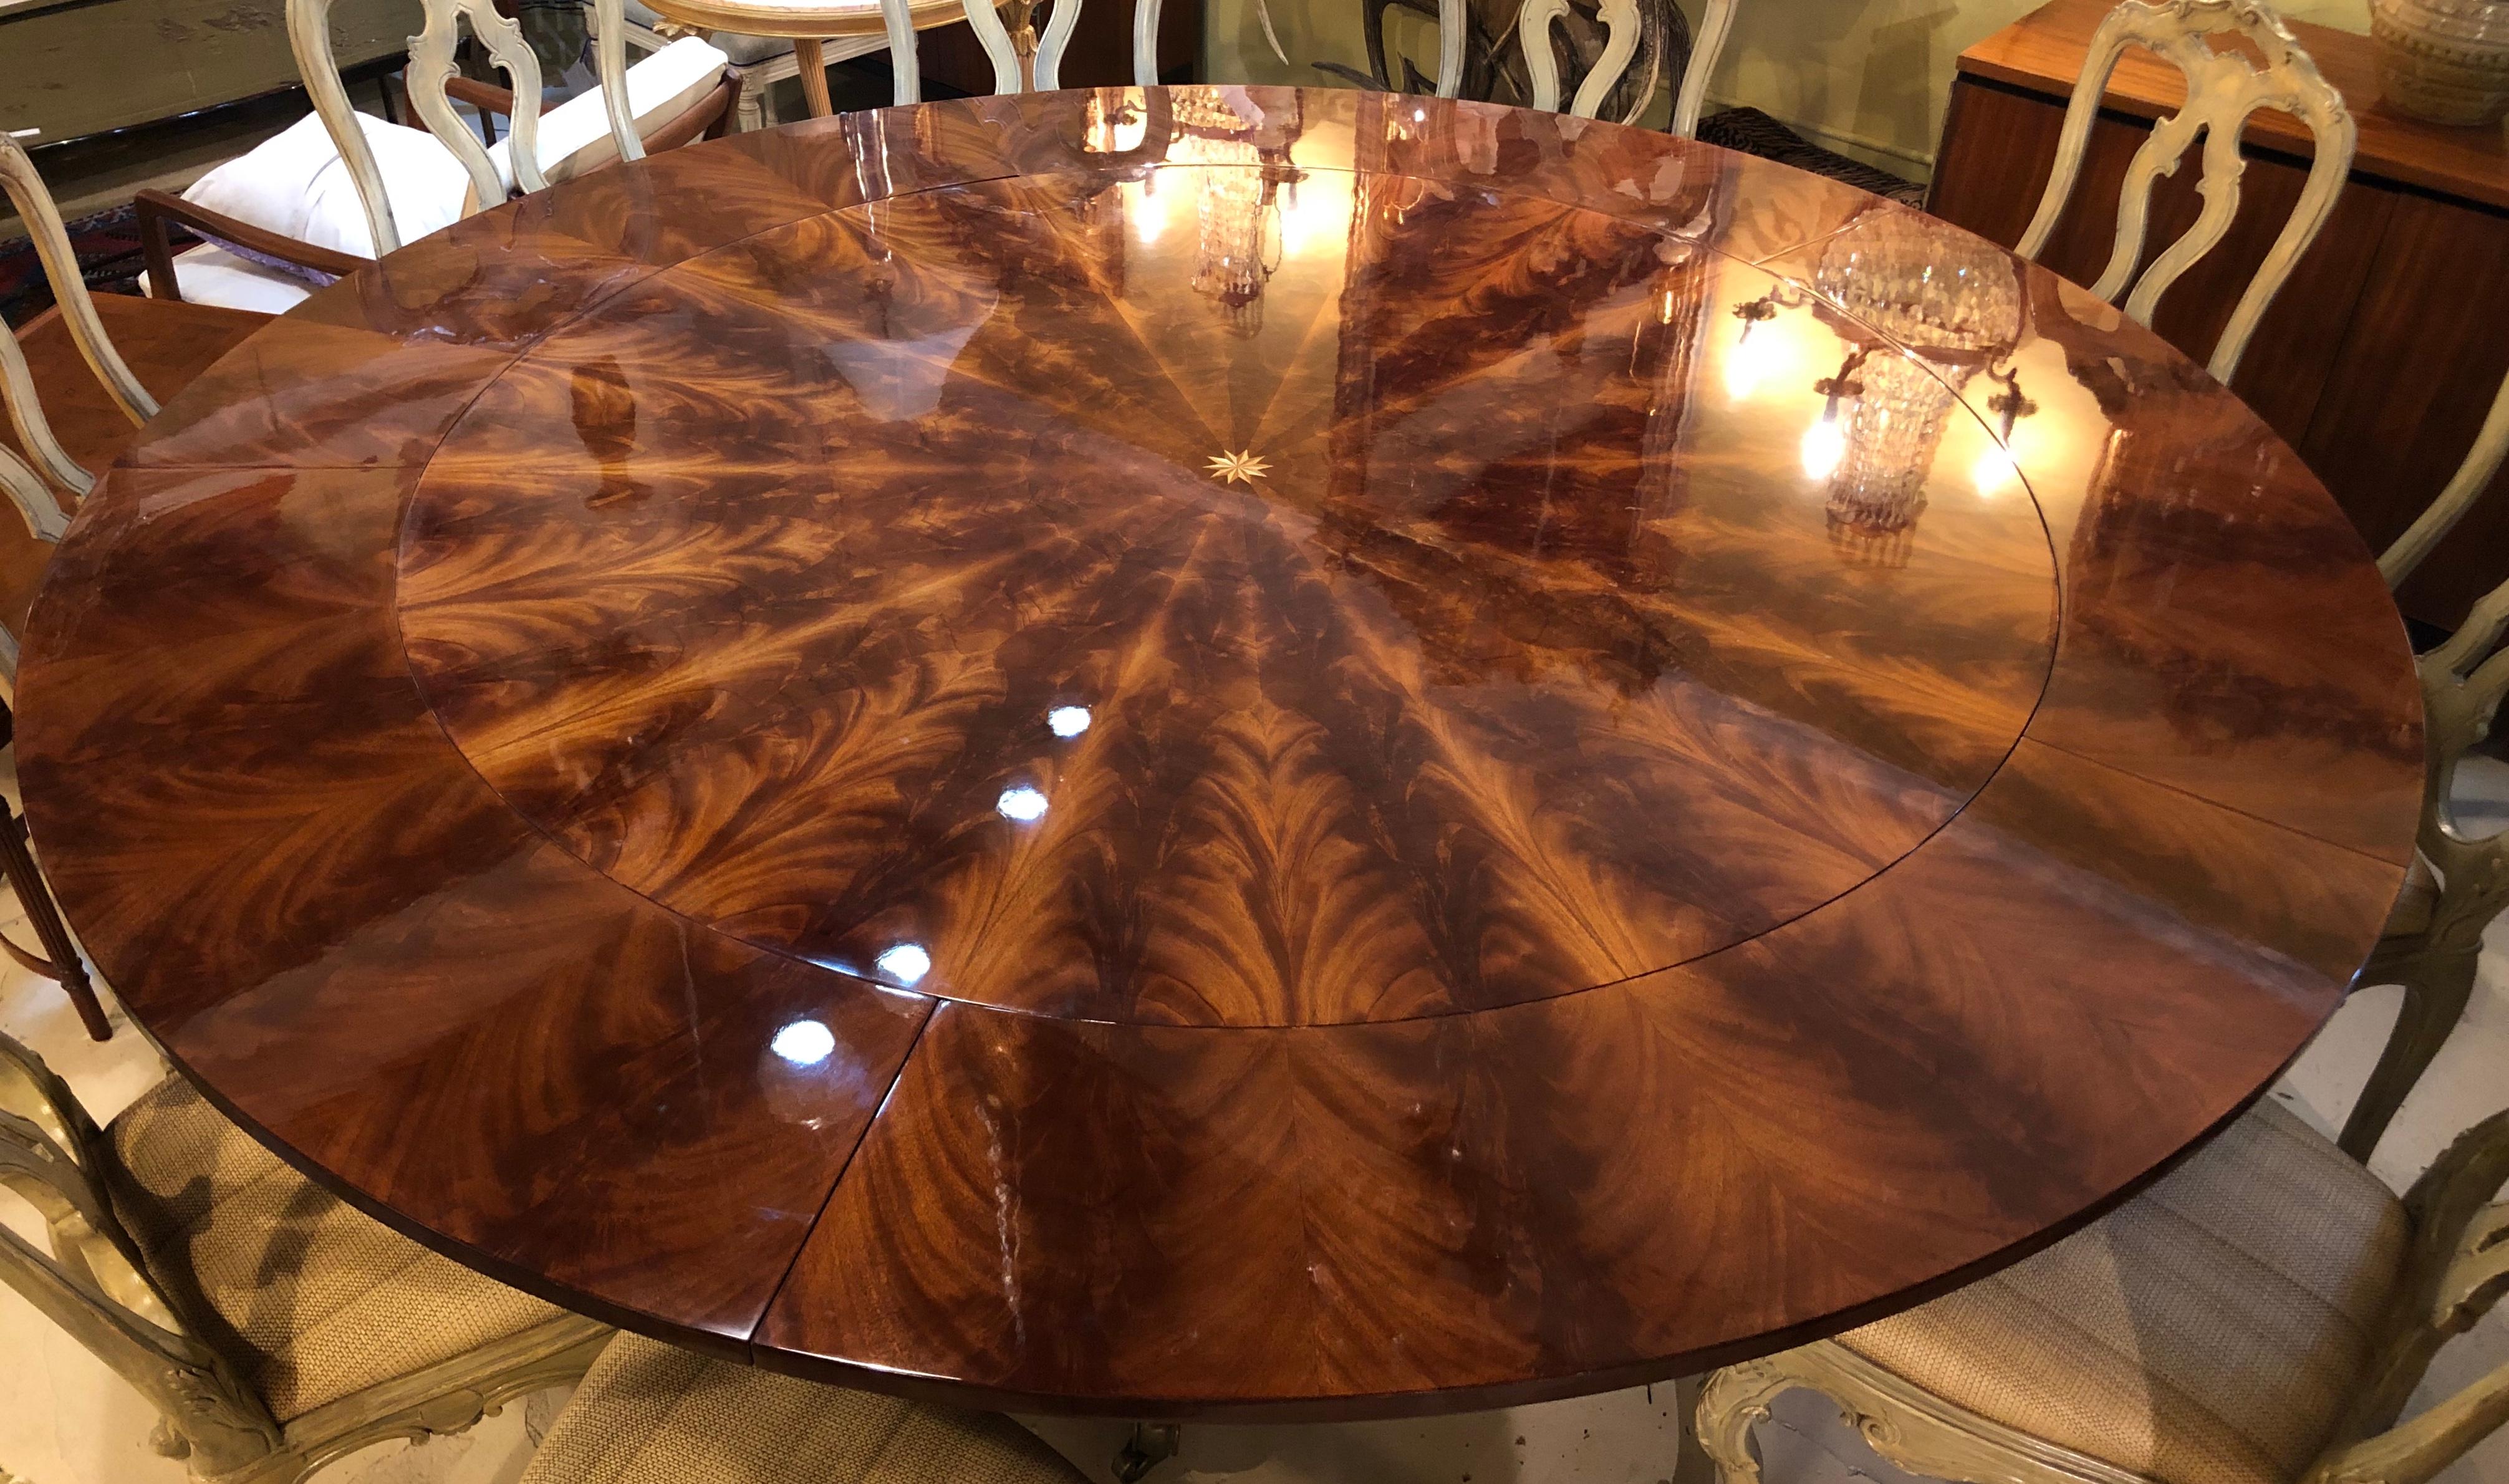 A  Georgian style flame mahogany sunburst inlaid circular dining table with five twelve inch leaves. Fully extended with all leaves this spectacular table is 87.5 inches in size. The strong and study table base having quad sprayed legs with brass